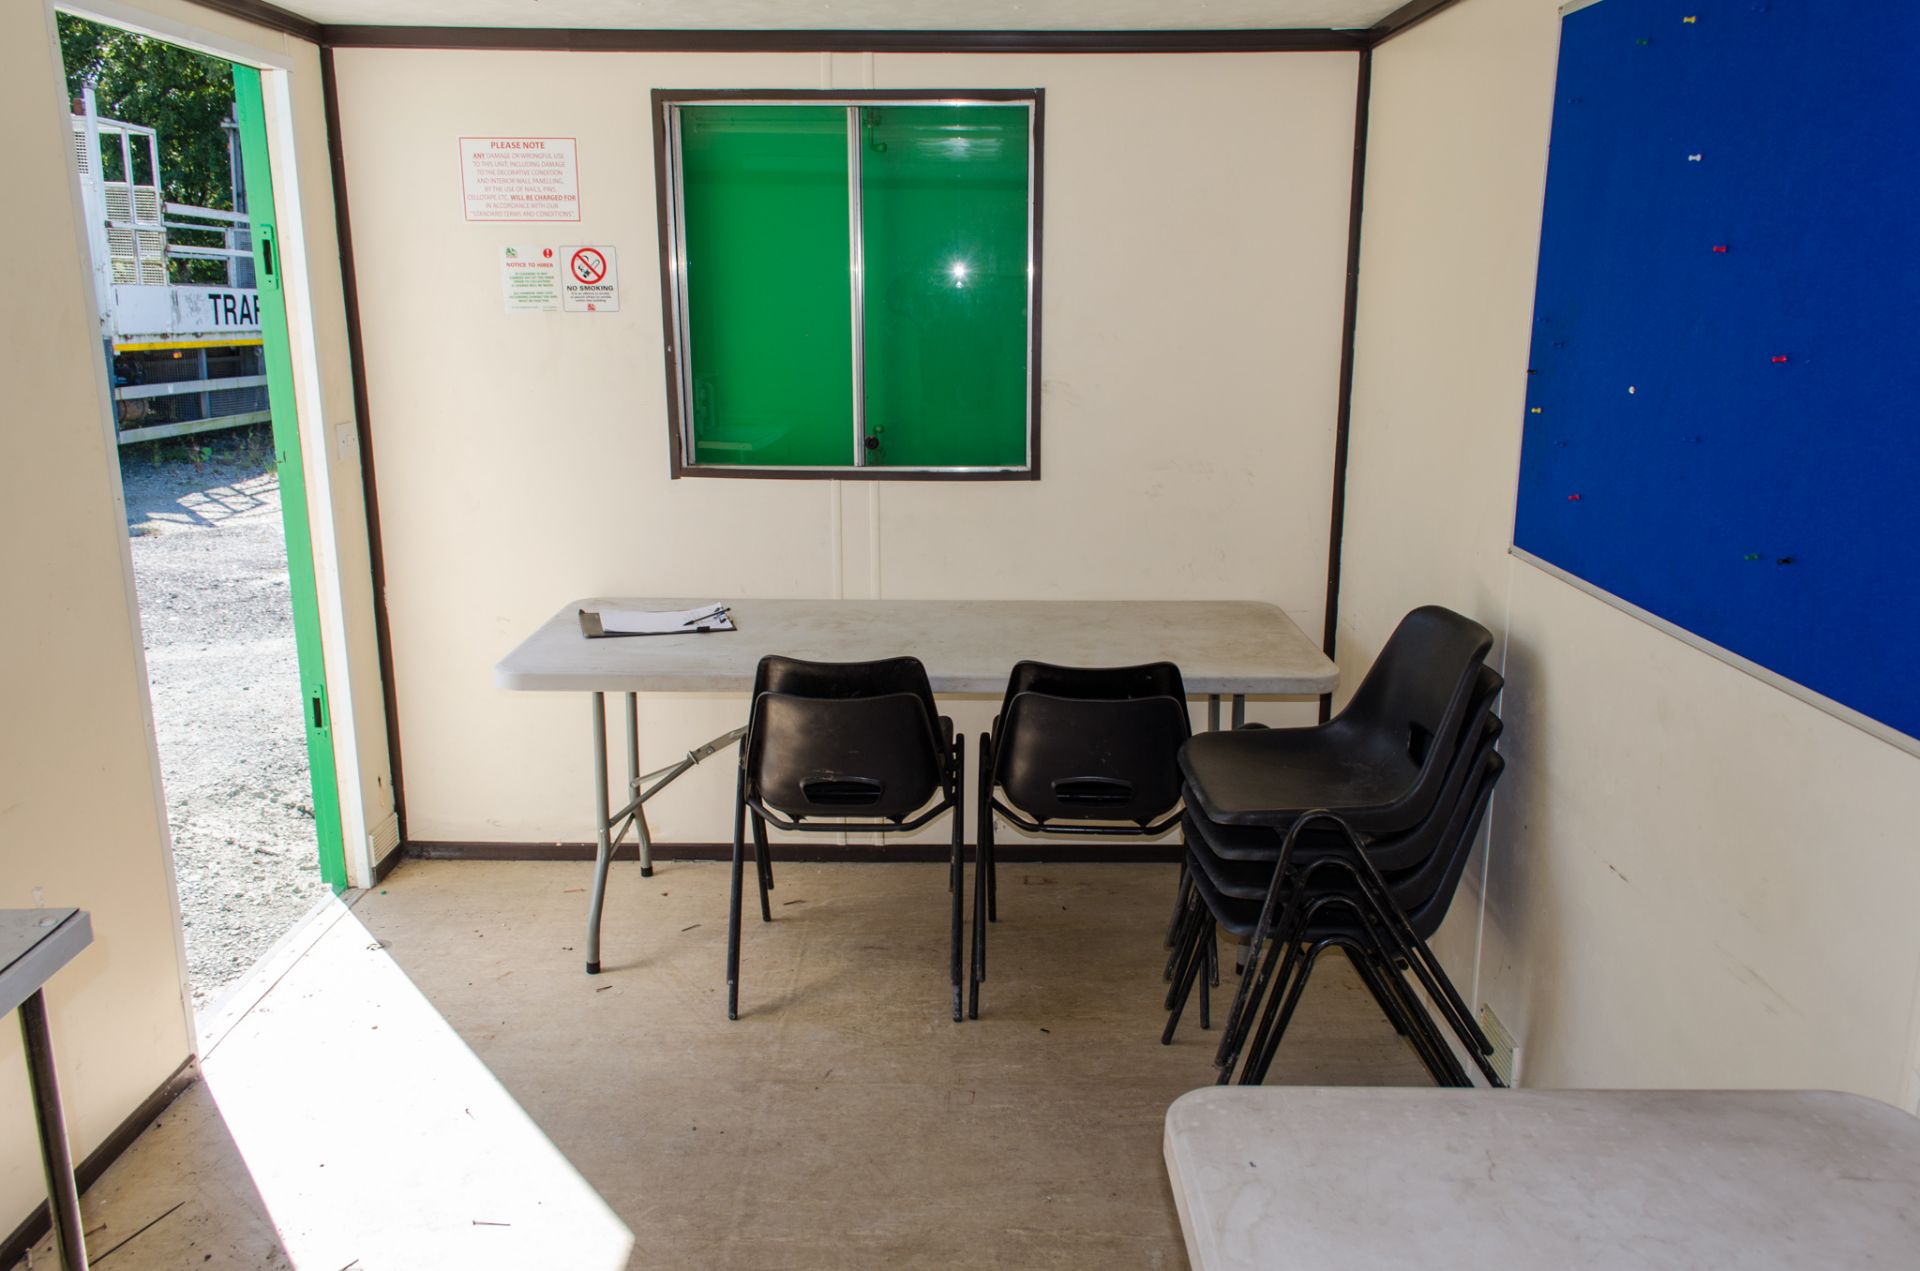 21 ft x 9 ft steel anti vandal welfare site unit Comprising of: canteen area, toilet & generator - Image 7 of 10